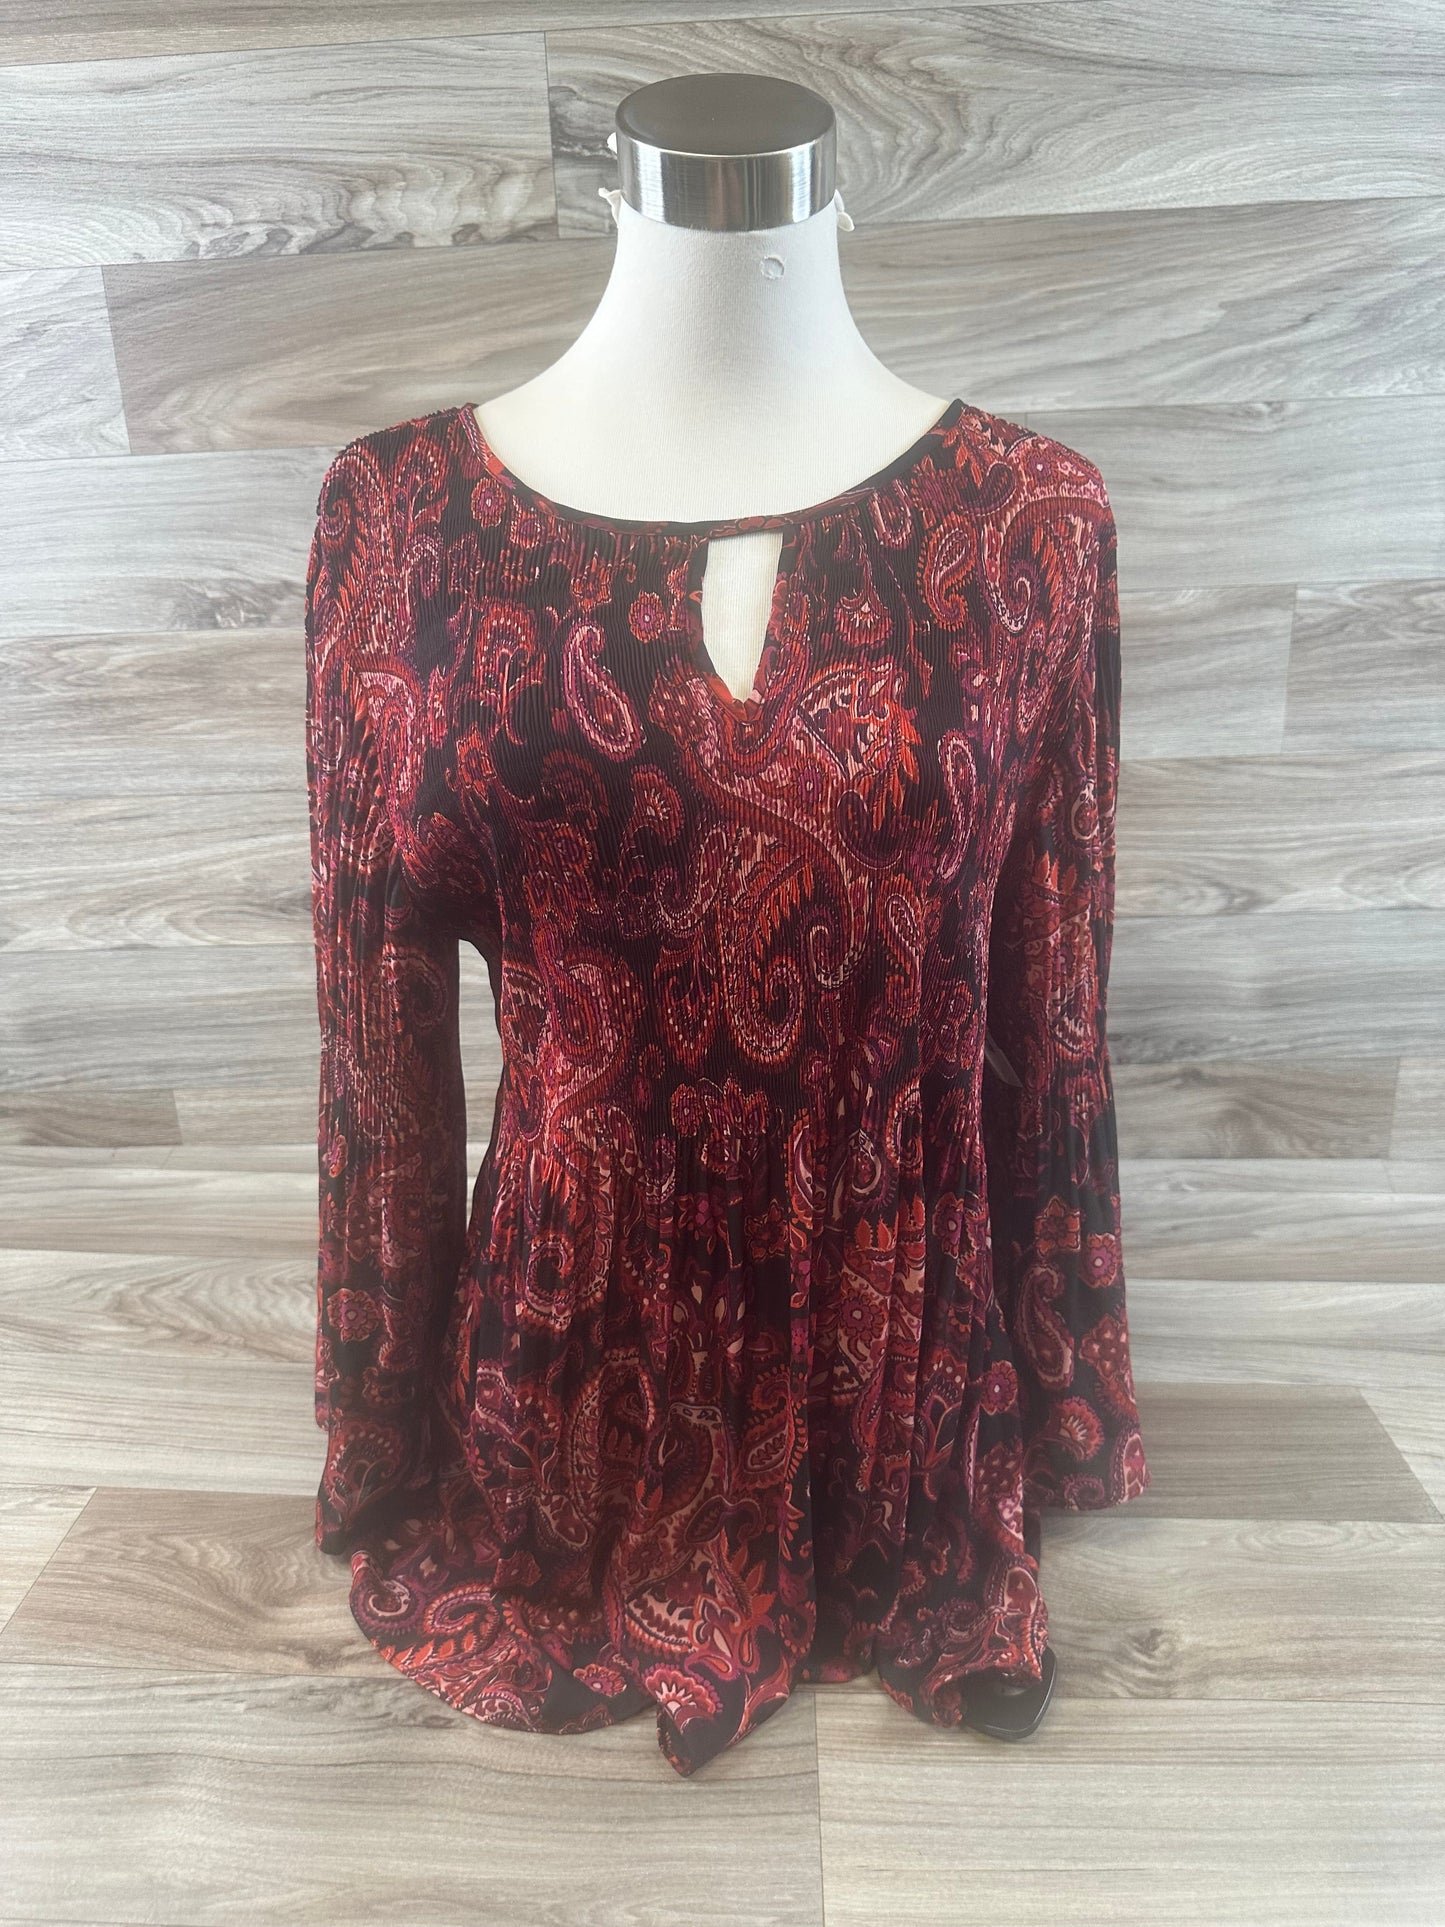 Paisley Print Top Long Sleeve Clothes Mentor, Size L